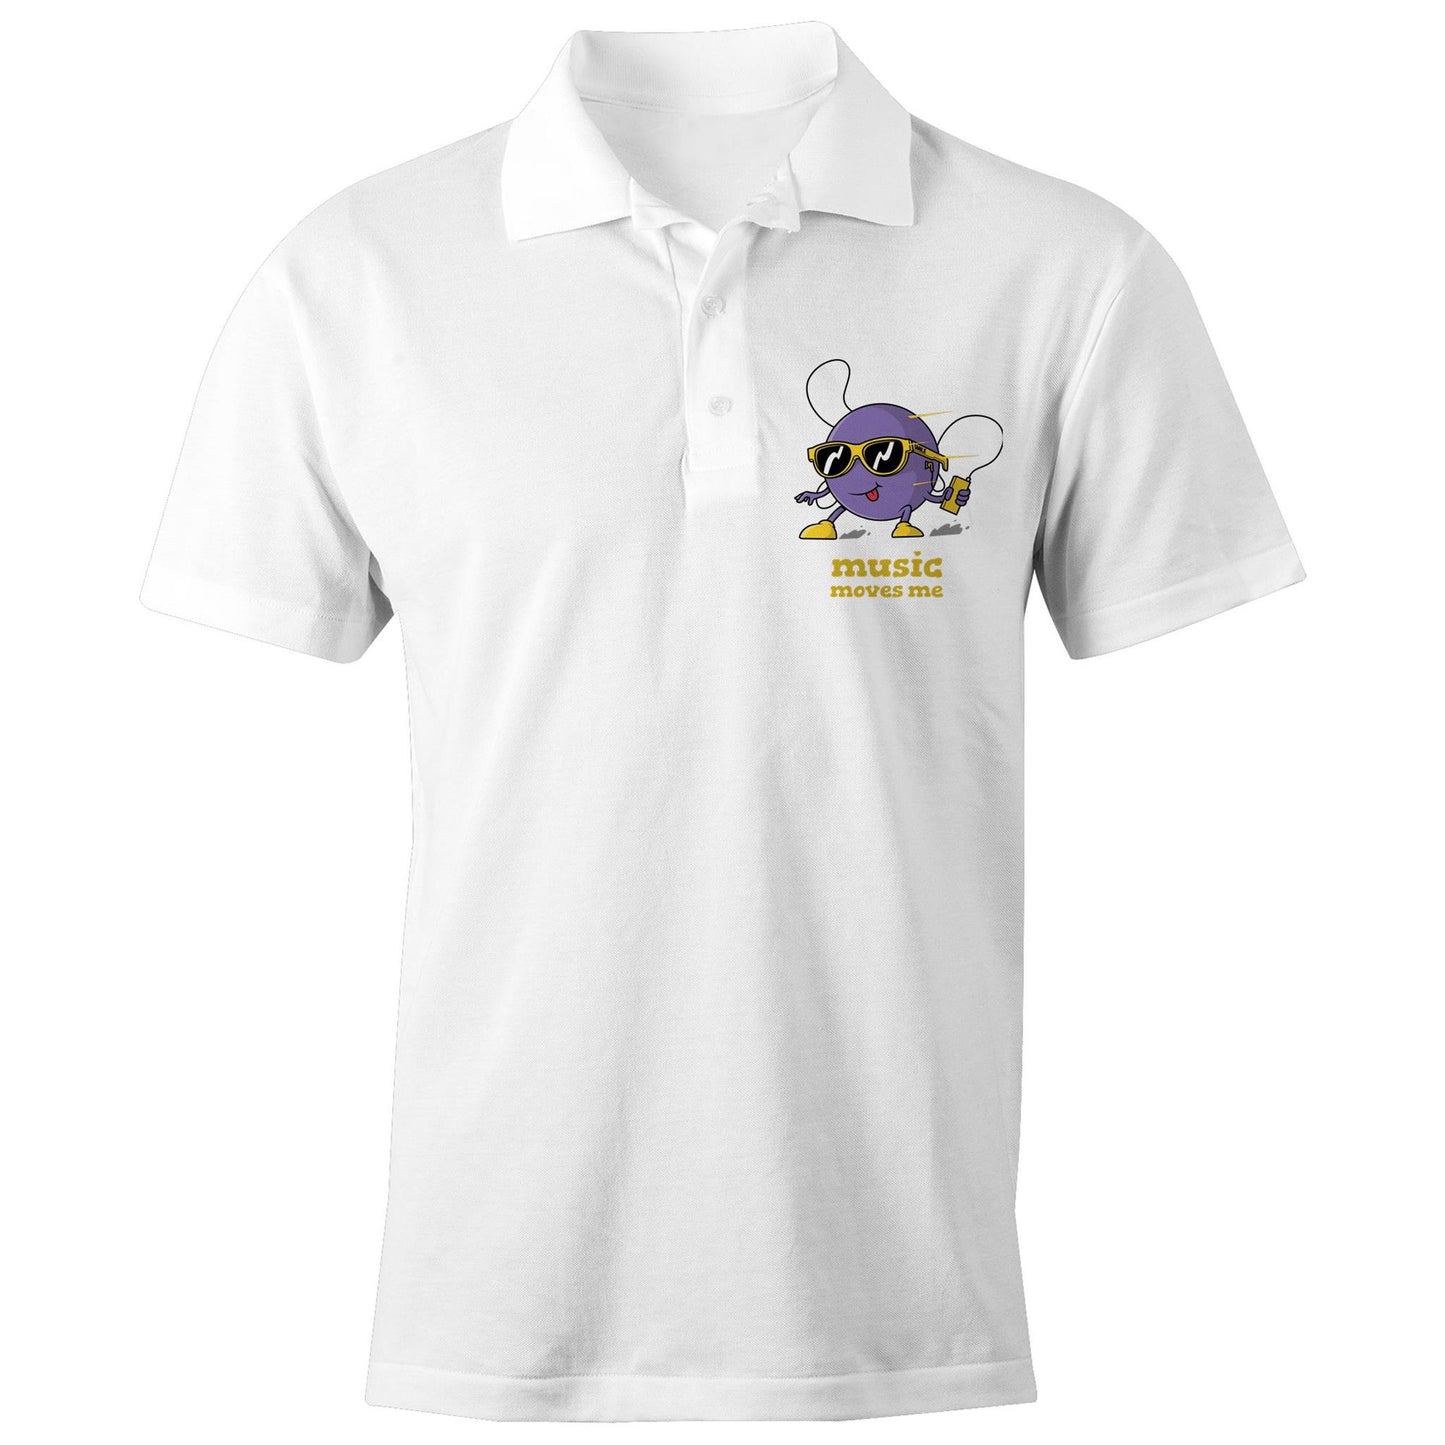 Music Moves Me, Earbuds - Chad S/S Polo Shirt White Polo Shirt Music